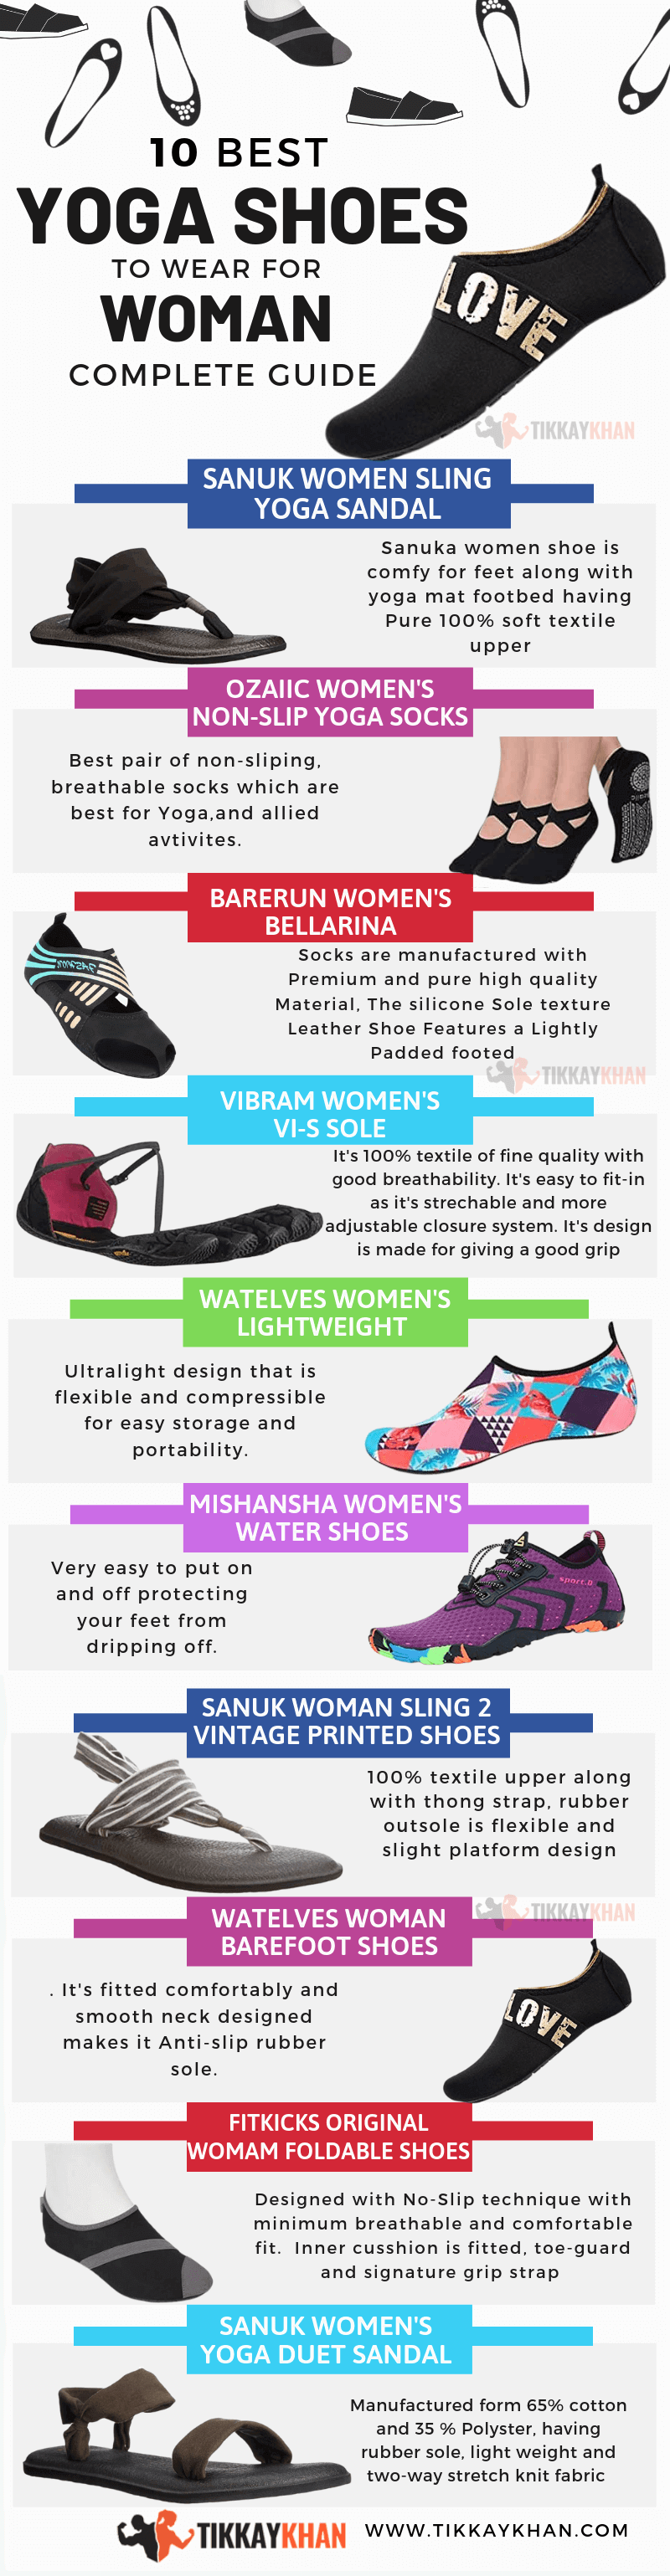 10 Best Yoga Shoes to Wear for Women